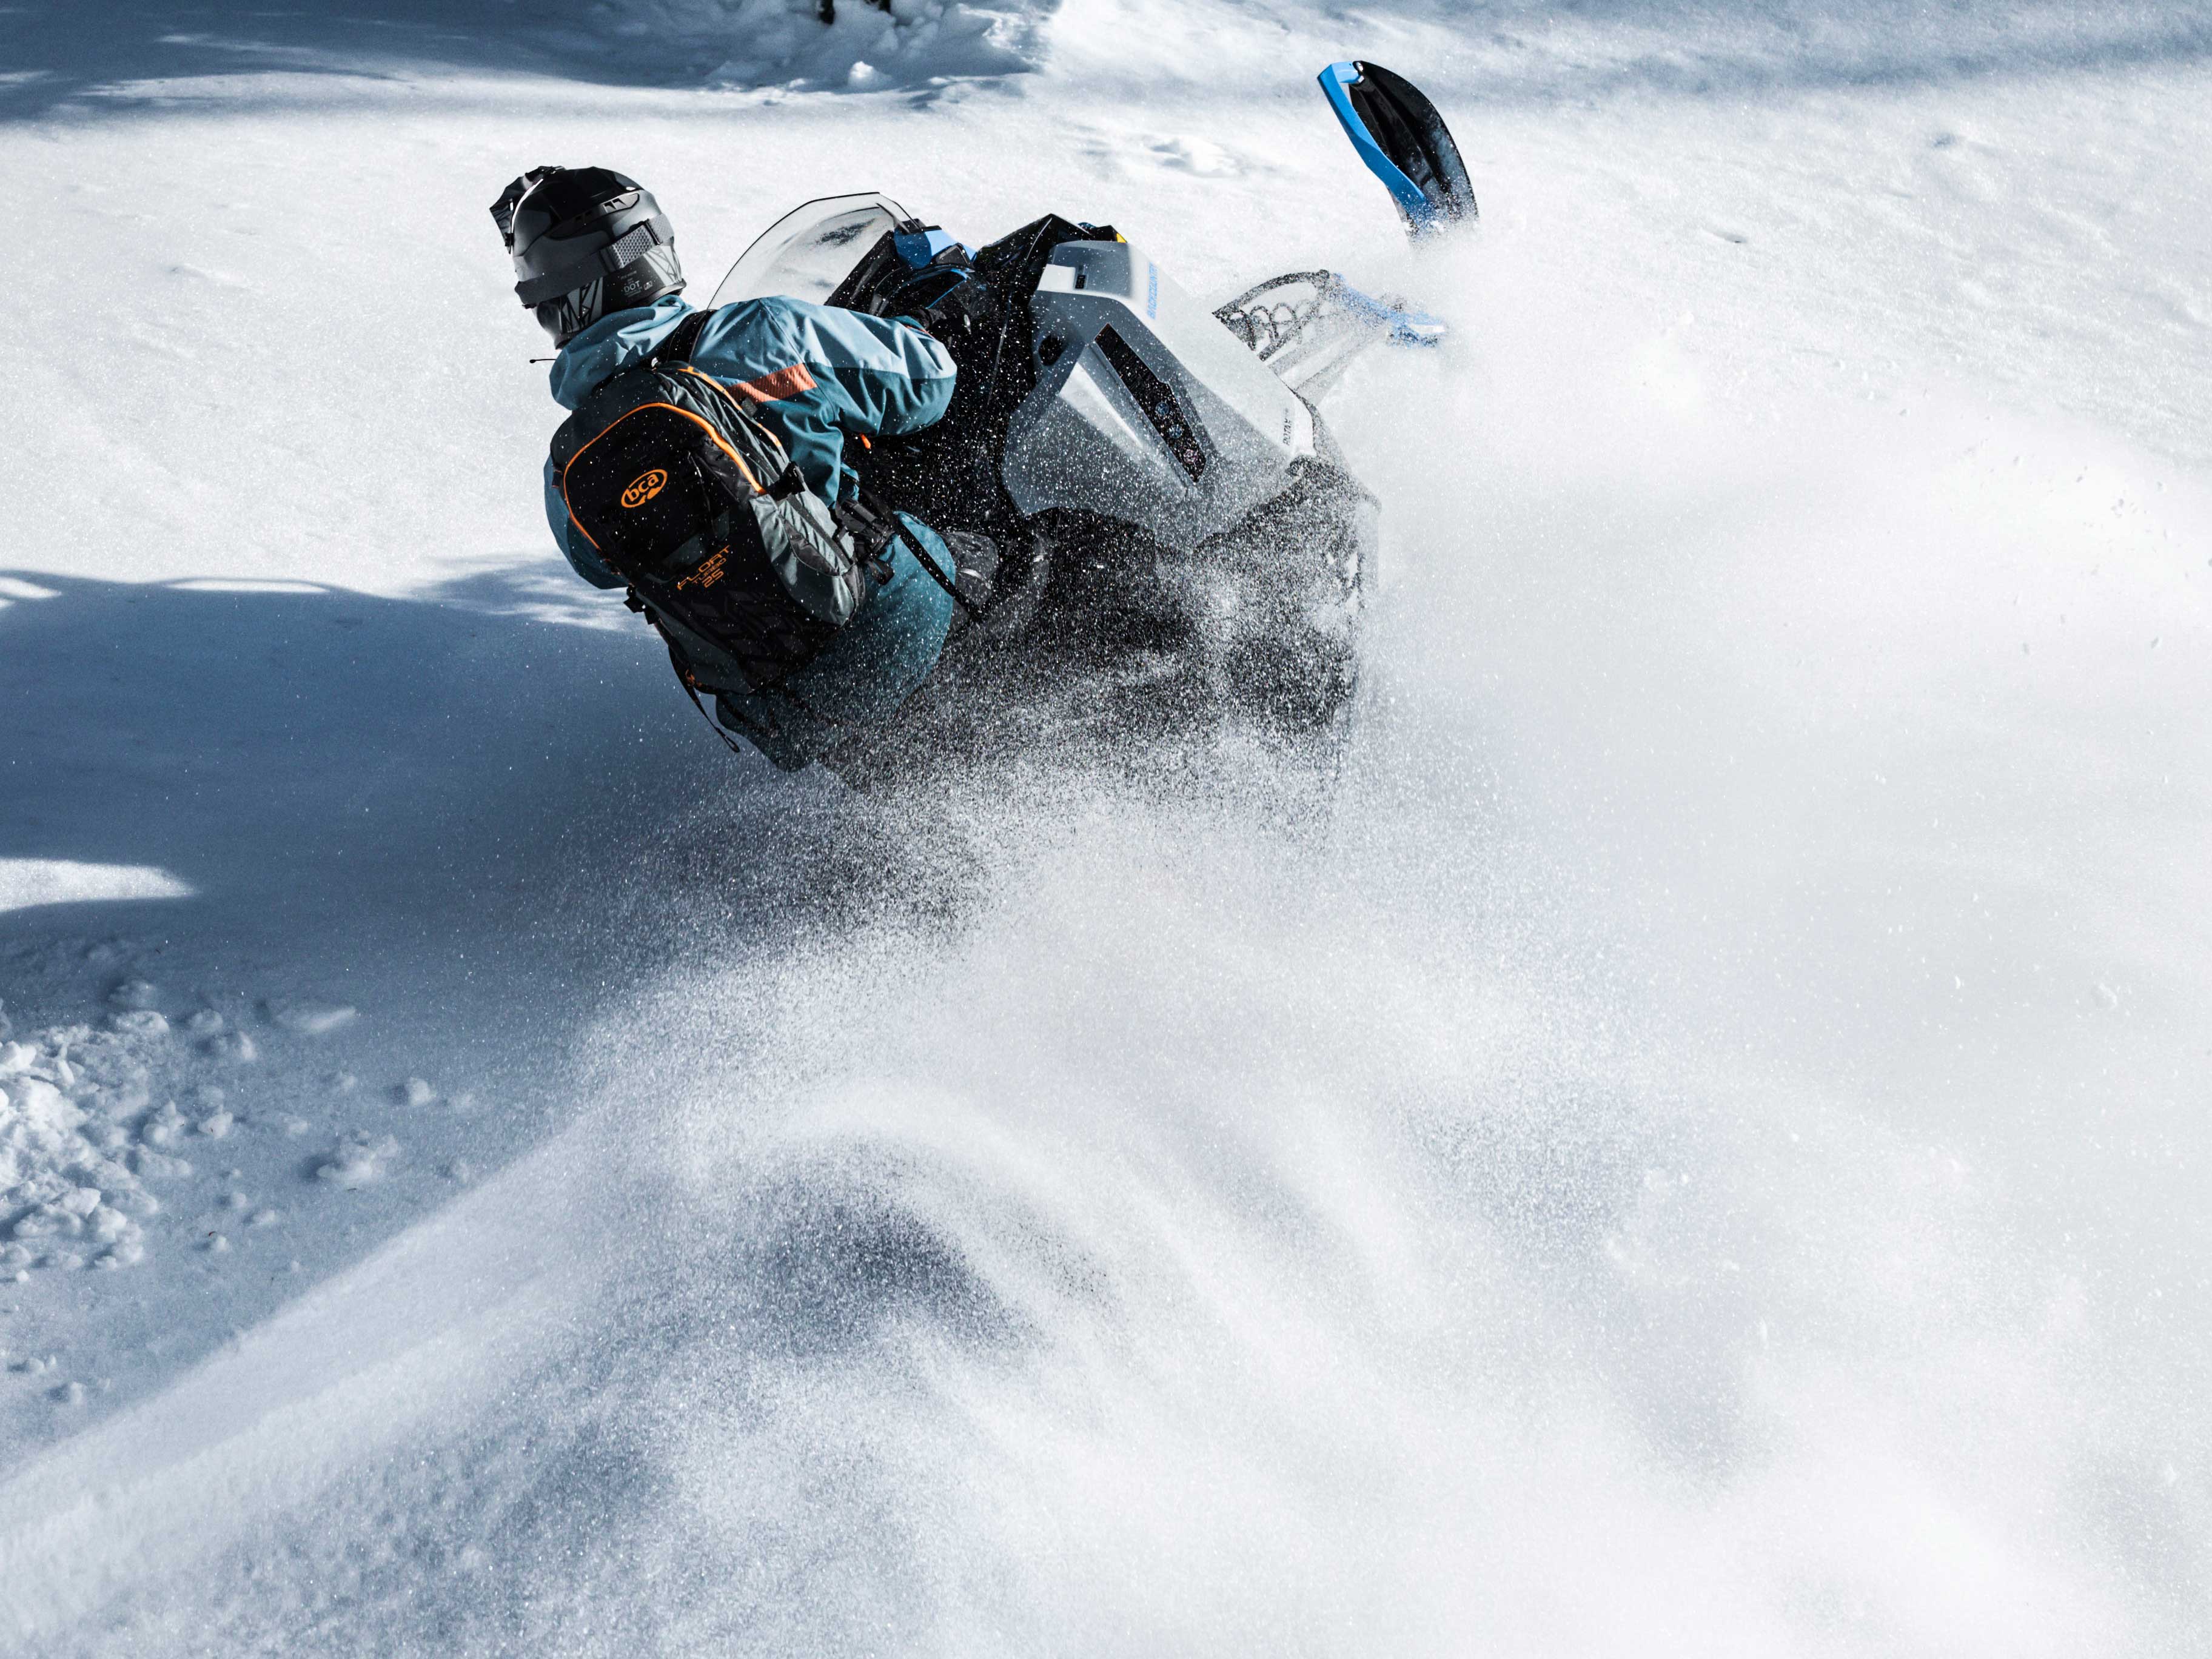 Man carving Powder with a 2022 Ski-Doo Backcountry